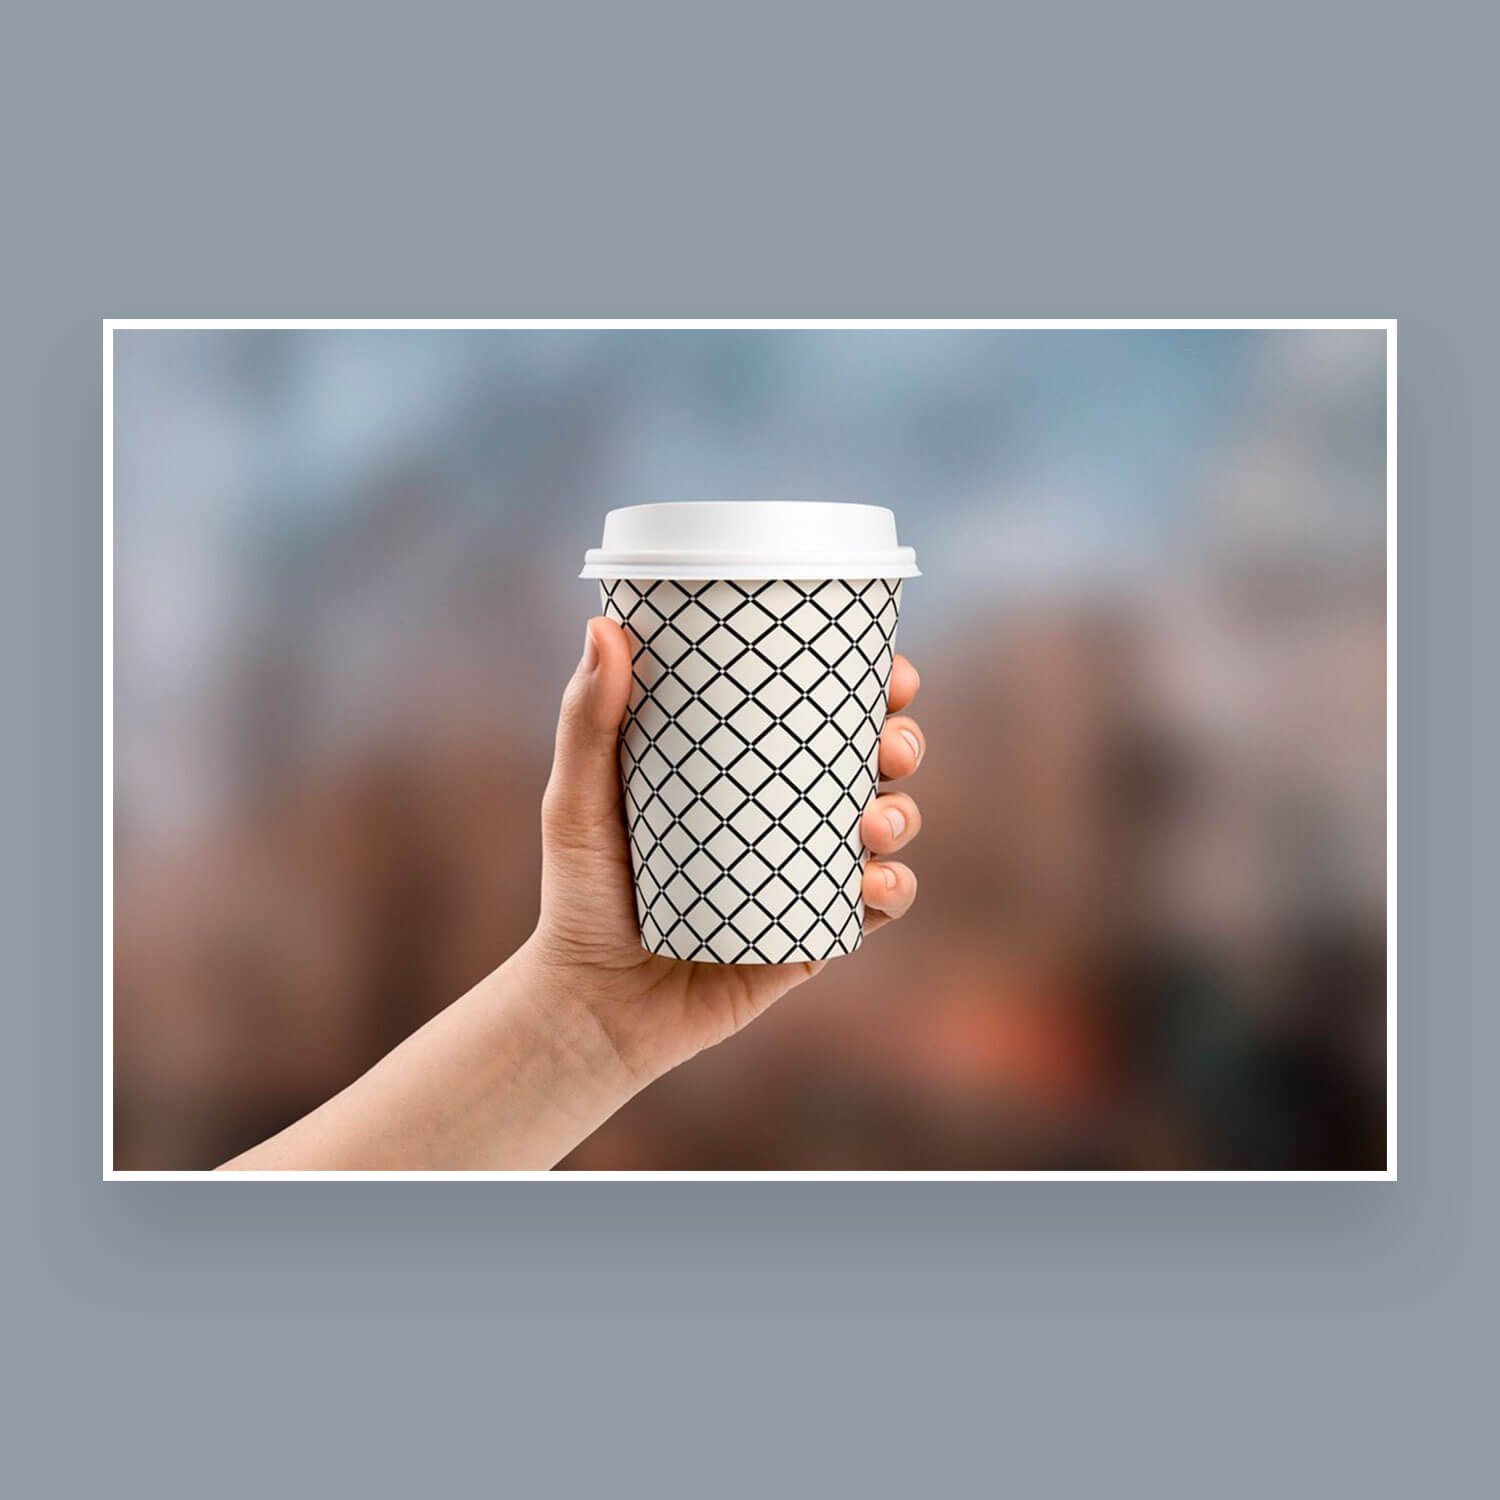 Seamless square and mesh patterns on a disposable cup with a lid on a rumpled, gray background.